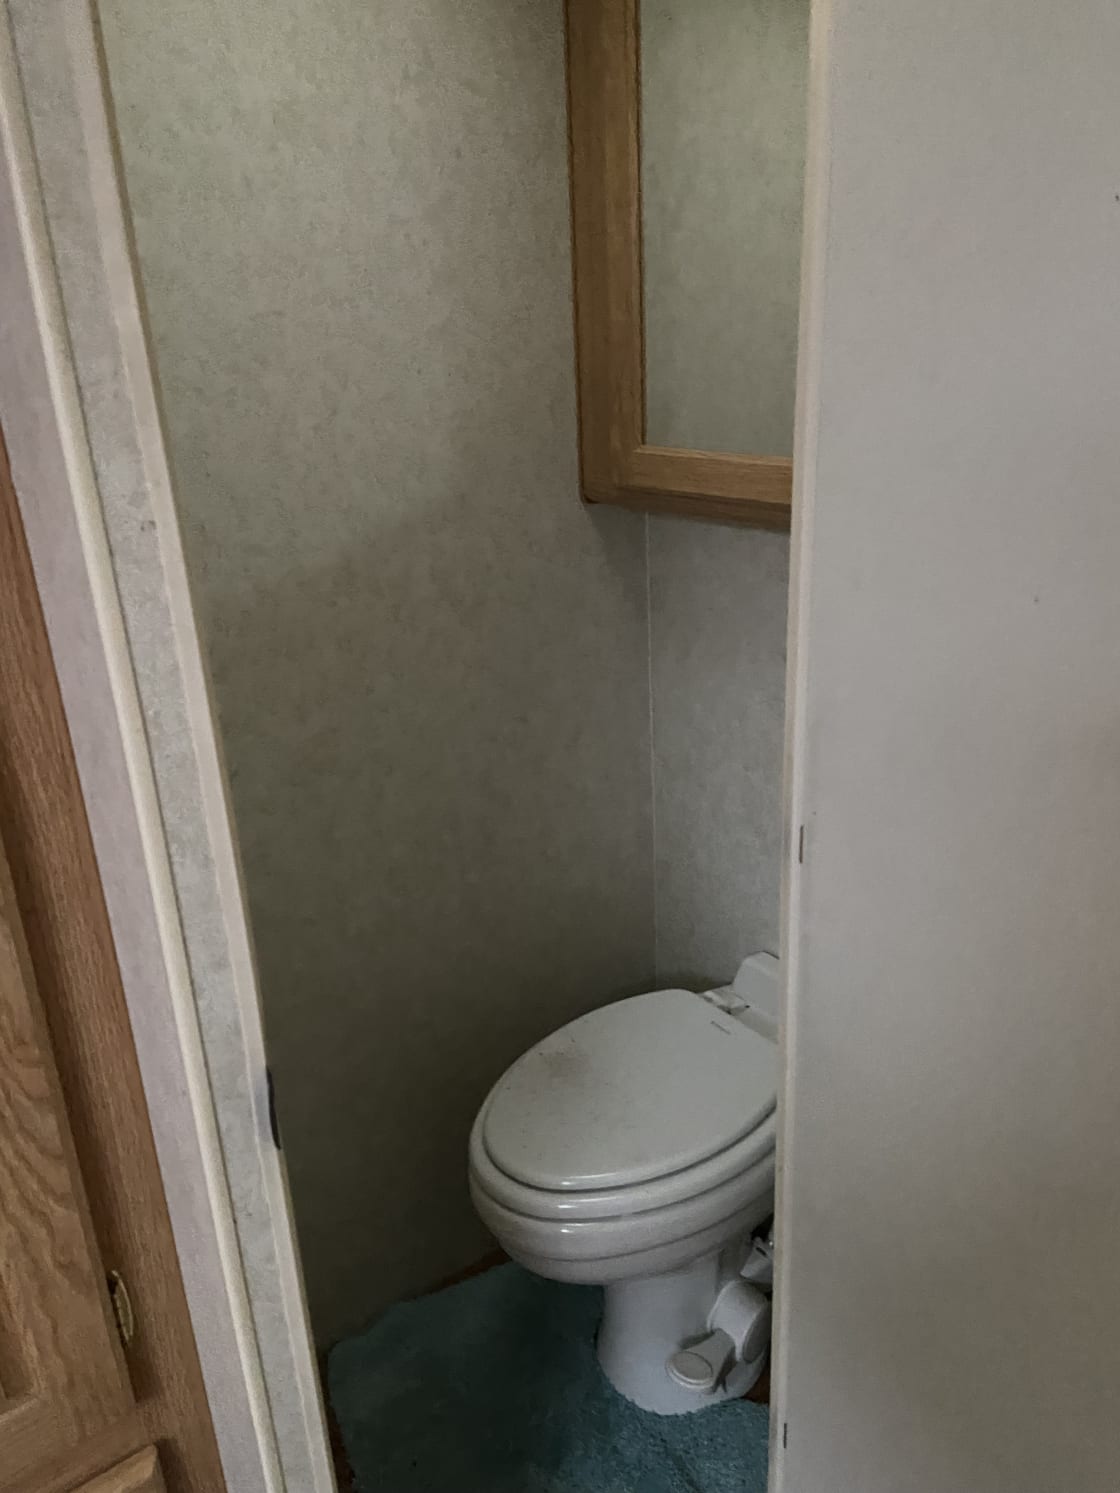 Private commode with door